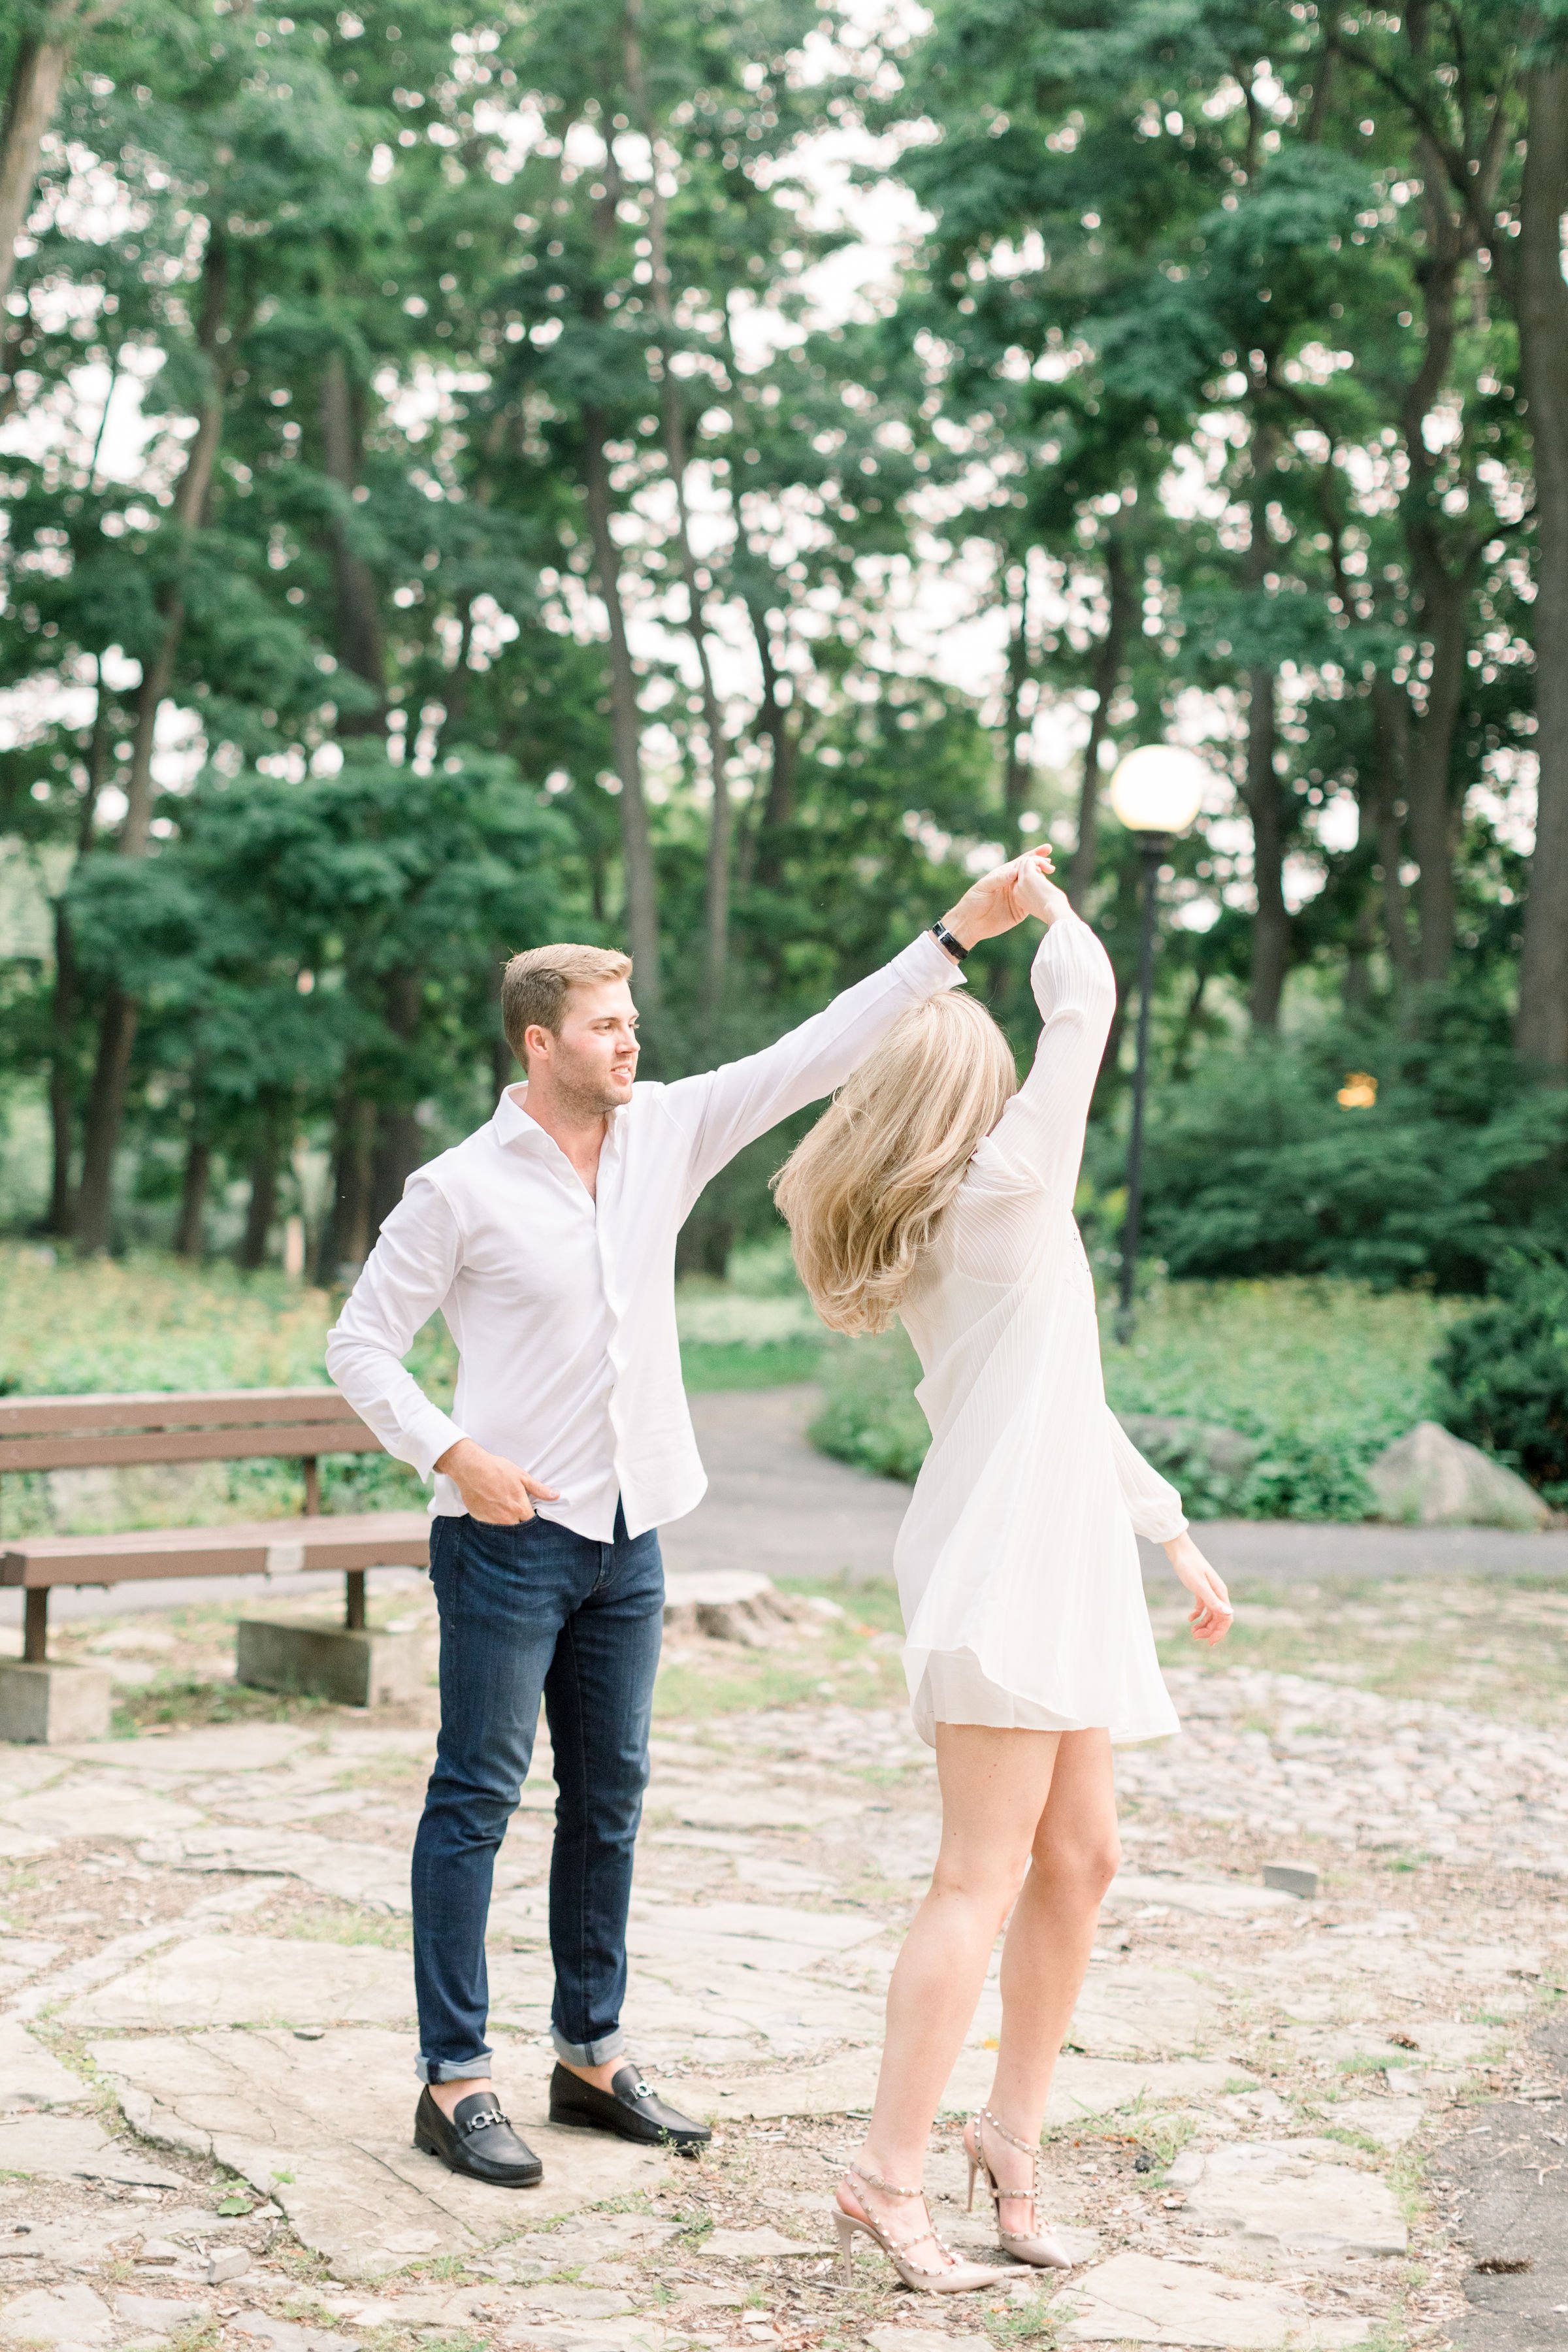  A man twirls his bride-to-be next to a bench captured by Chelsea Mason Photography. dancing with a boy in white outfits #Ottawaengagements #Ottawaweddingphotographers #engagementwithdogs #ChelseaMasonPhotography #ChelseaMasonEngagements  